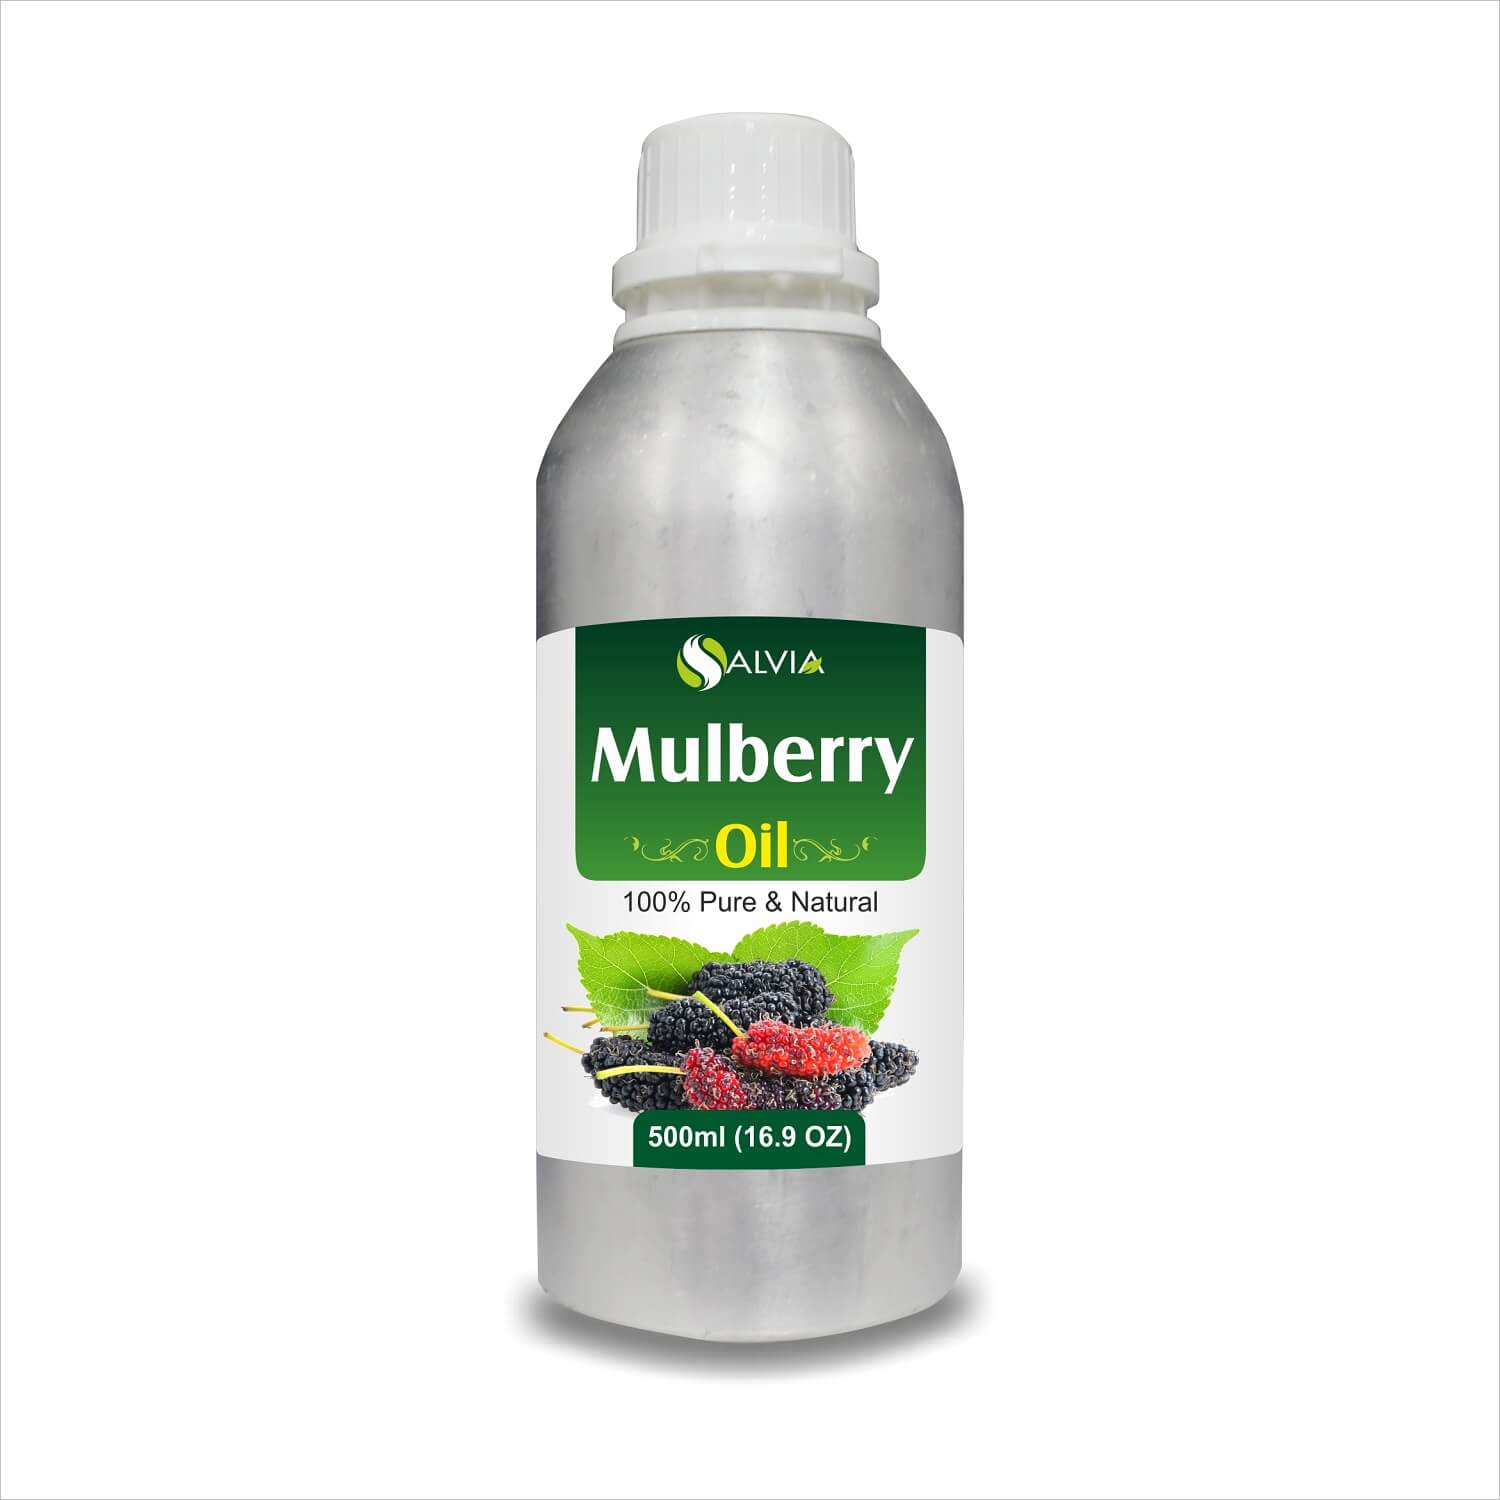 Salvia Natural Essential Oils Mulberry Oil (Morus alba) Pure, Natural And Cold Pressed Mulberry oil | For Diffusers, Soap Making, Candles, Lotion, Home Scents, Bath Bombs, DIY Homemade Products